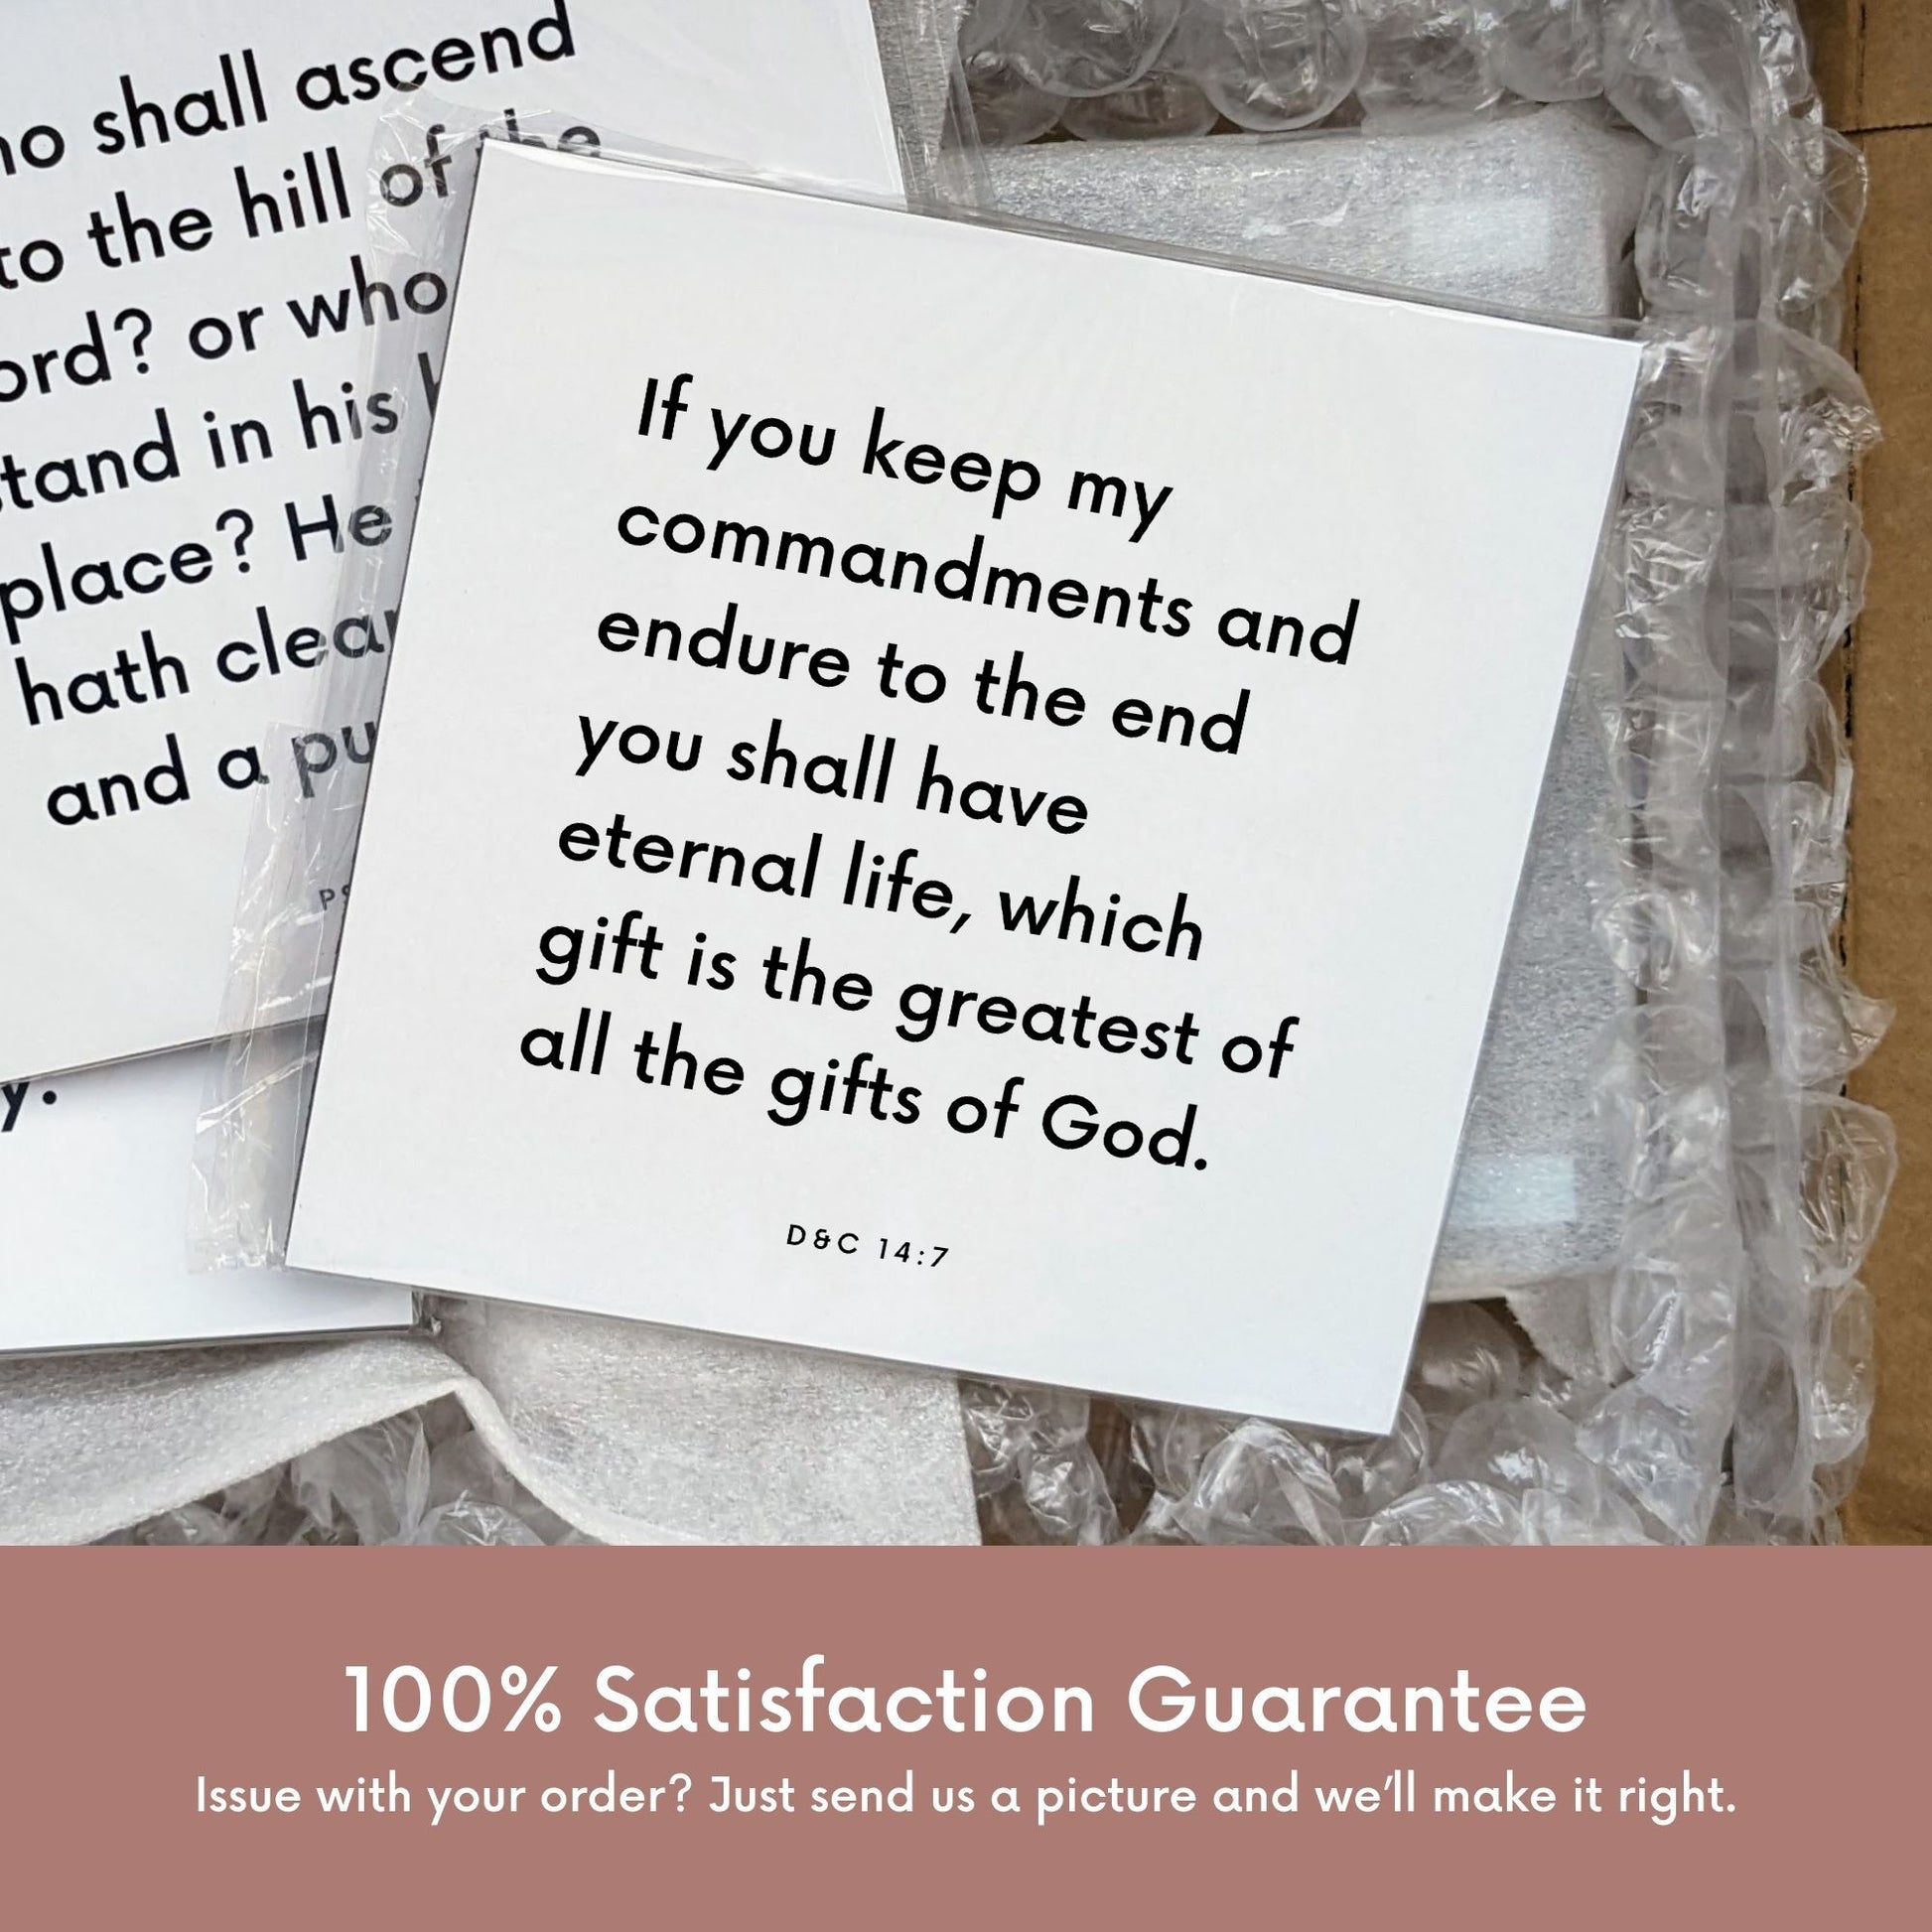 Shipping materials for scripture tile of D&C 14:7 - "If you keep my commandments and endure to the end"